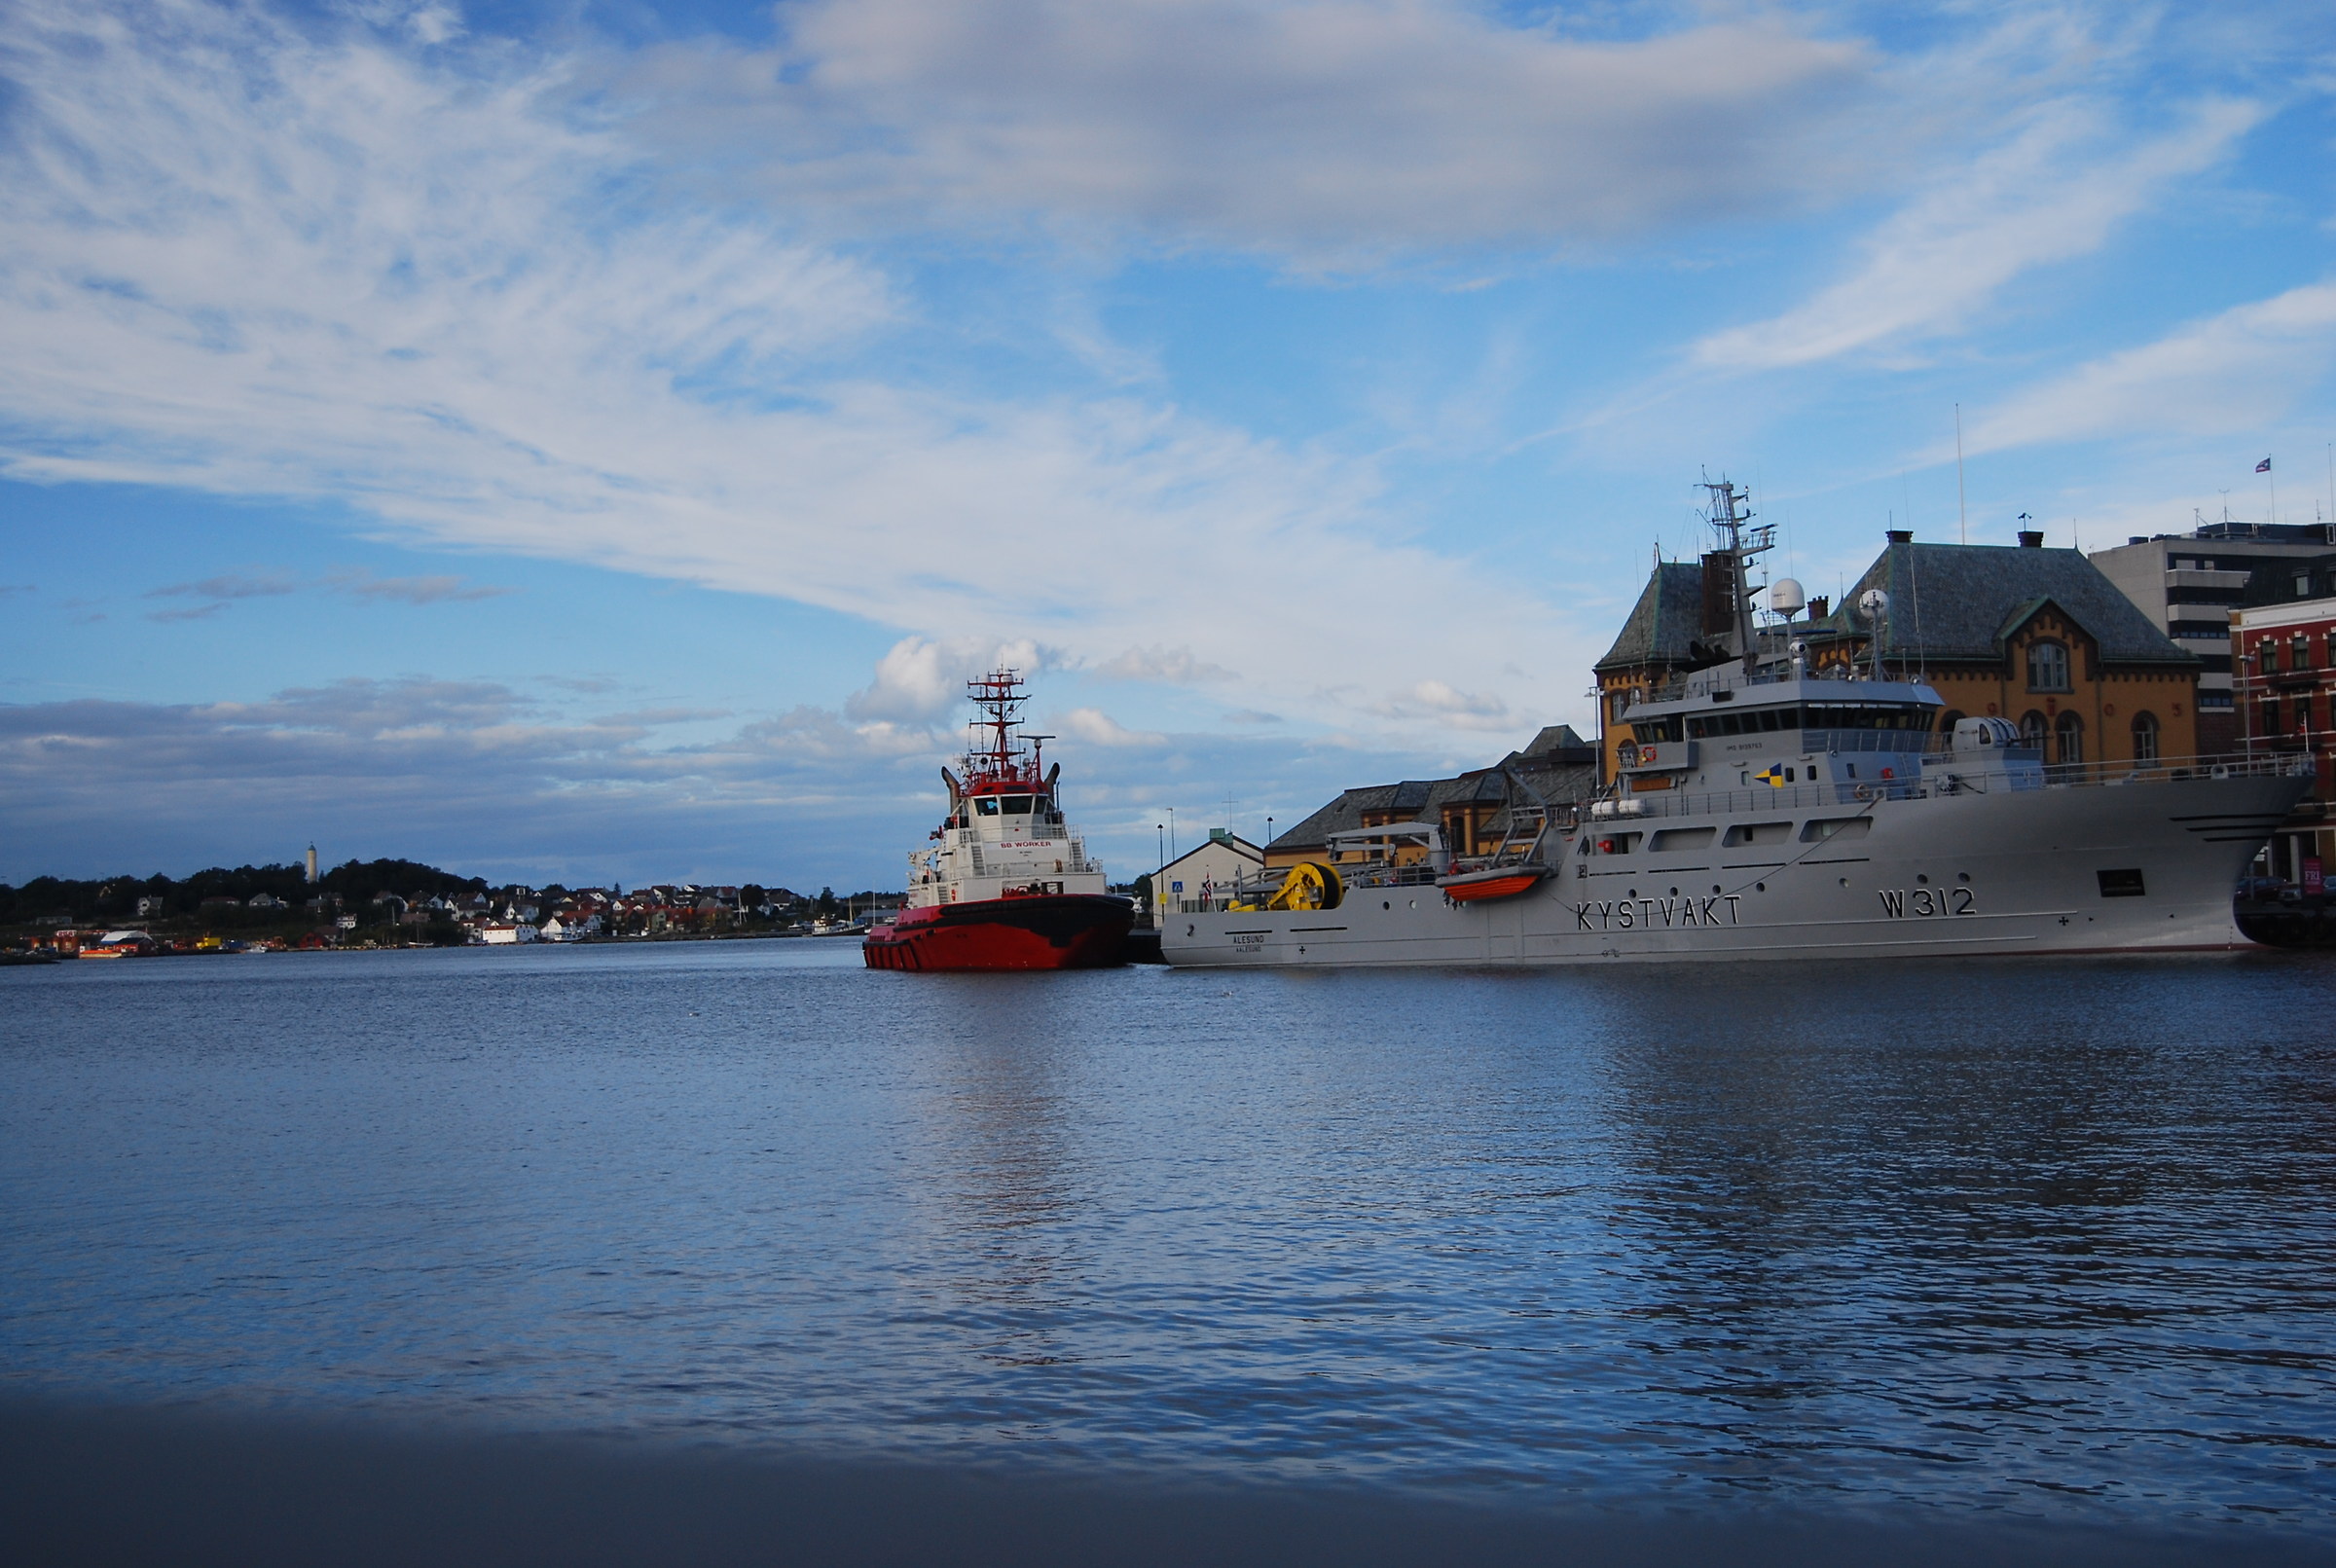 war and peace (Stavanger -Norway)...